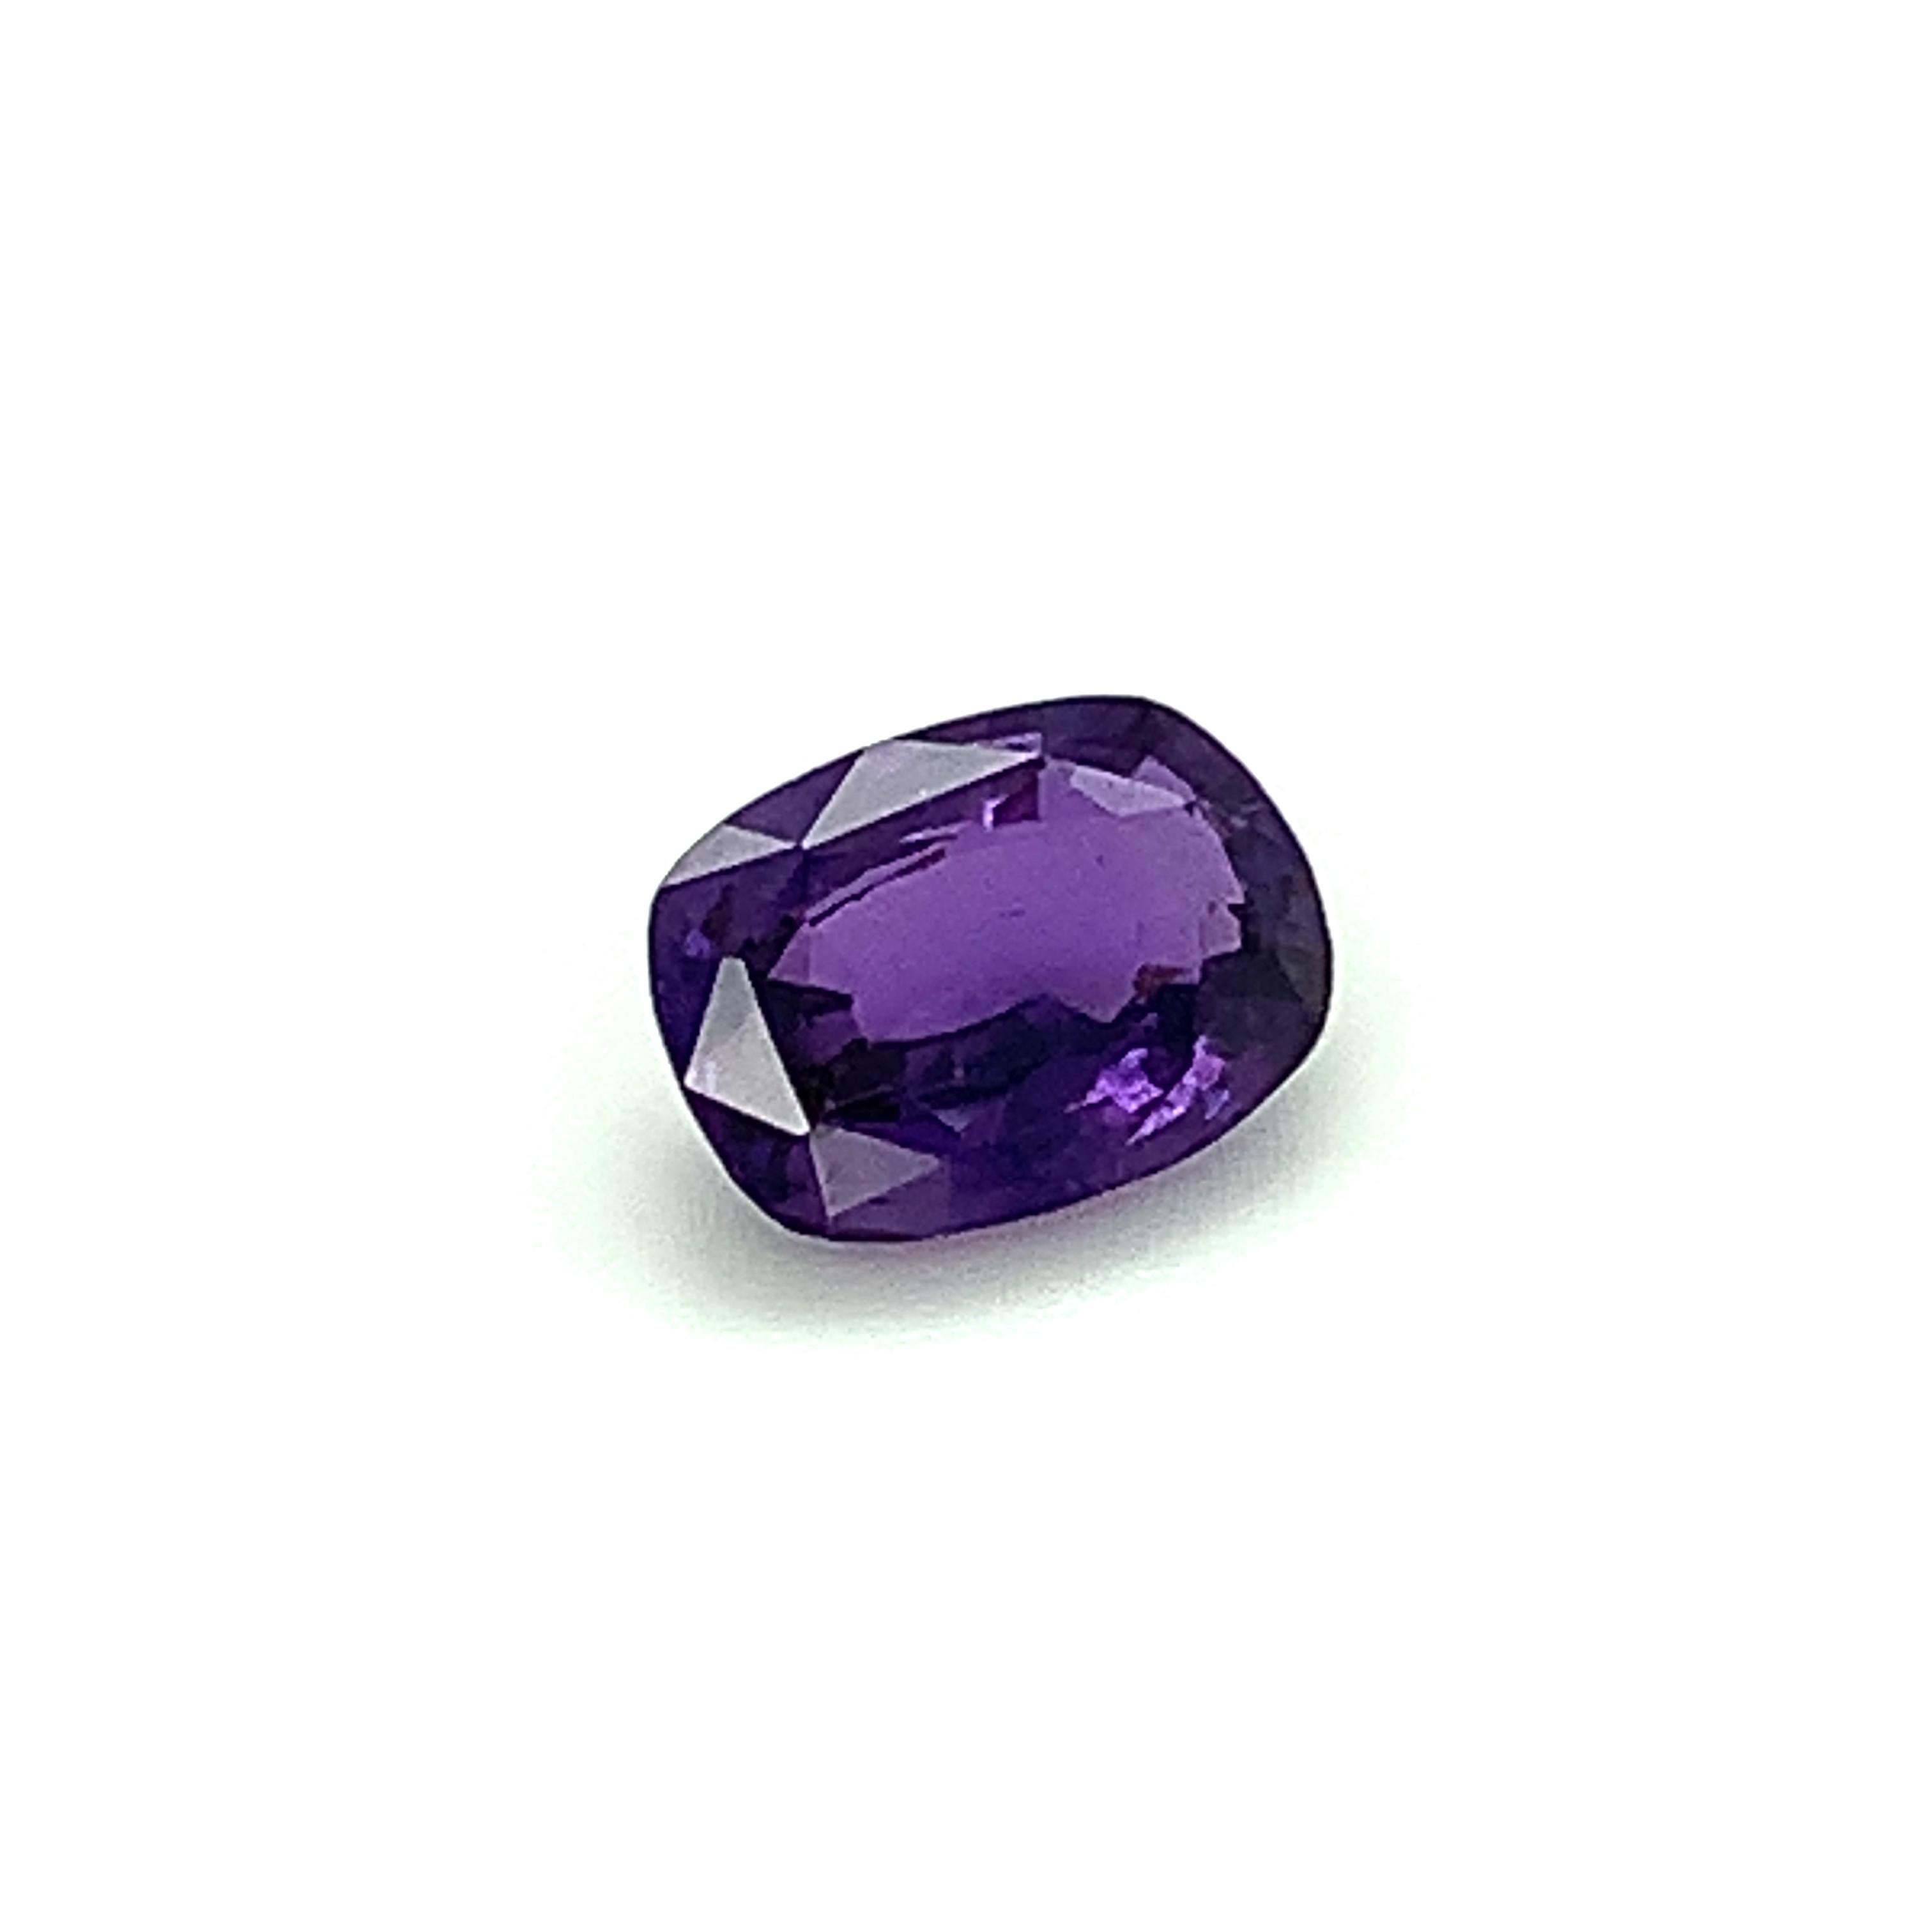 Artisan Unheated 3.50 Carat Color Change Sapphire, Unset Loose Gemstone, GIA Certified